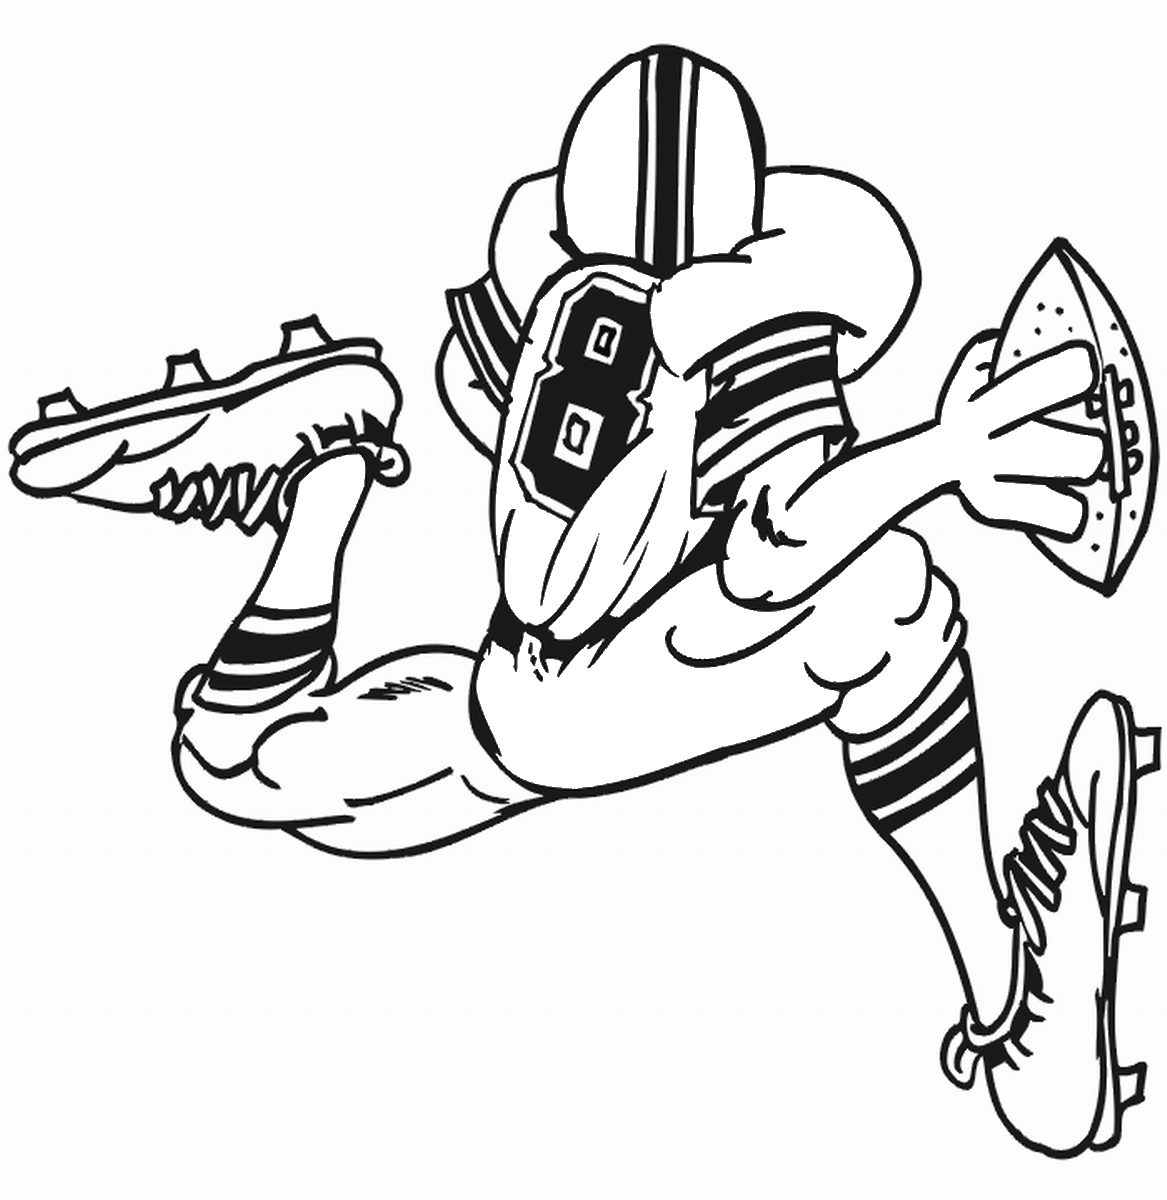 Football Coloring Pages for boys free football Printable 2020 0397 Coloring4free